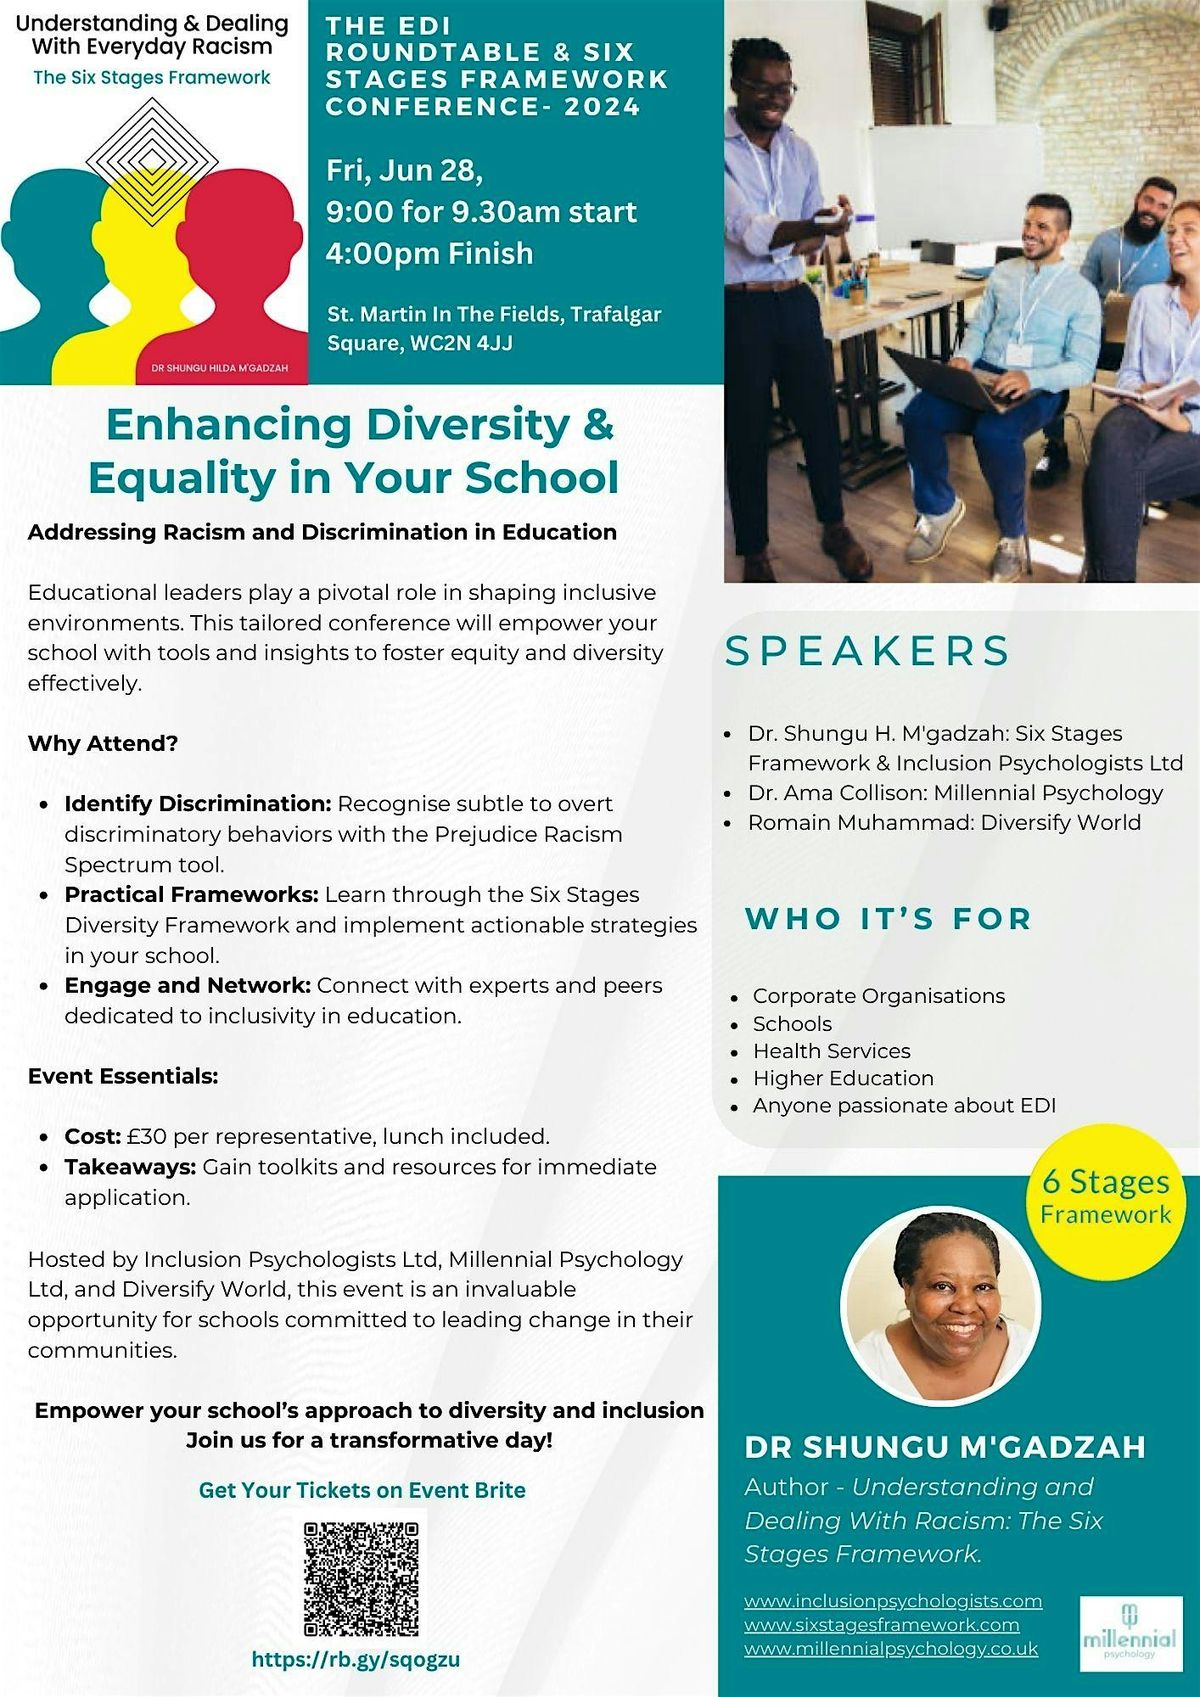 Improving Equality and Diversity in Schools & EDI Roundtable